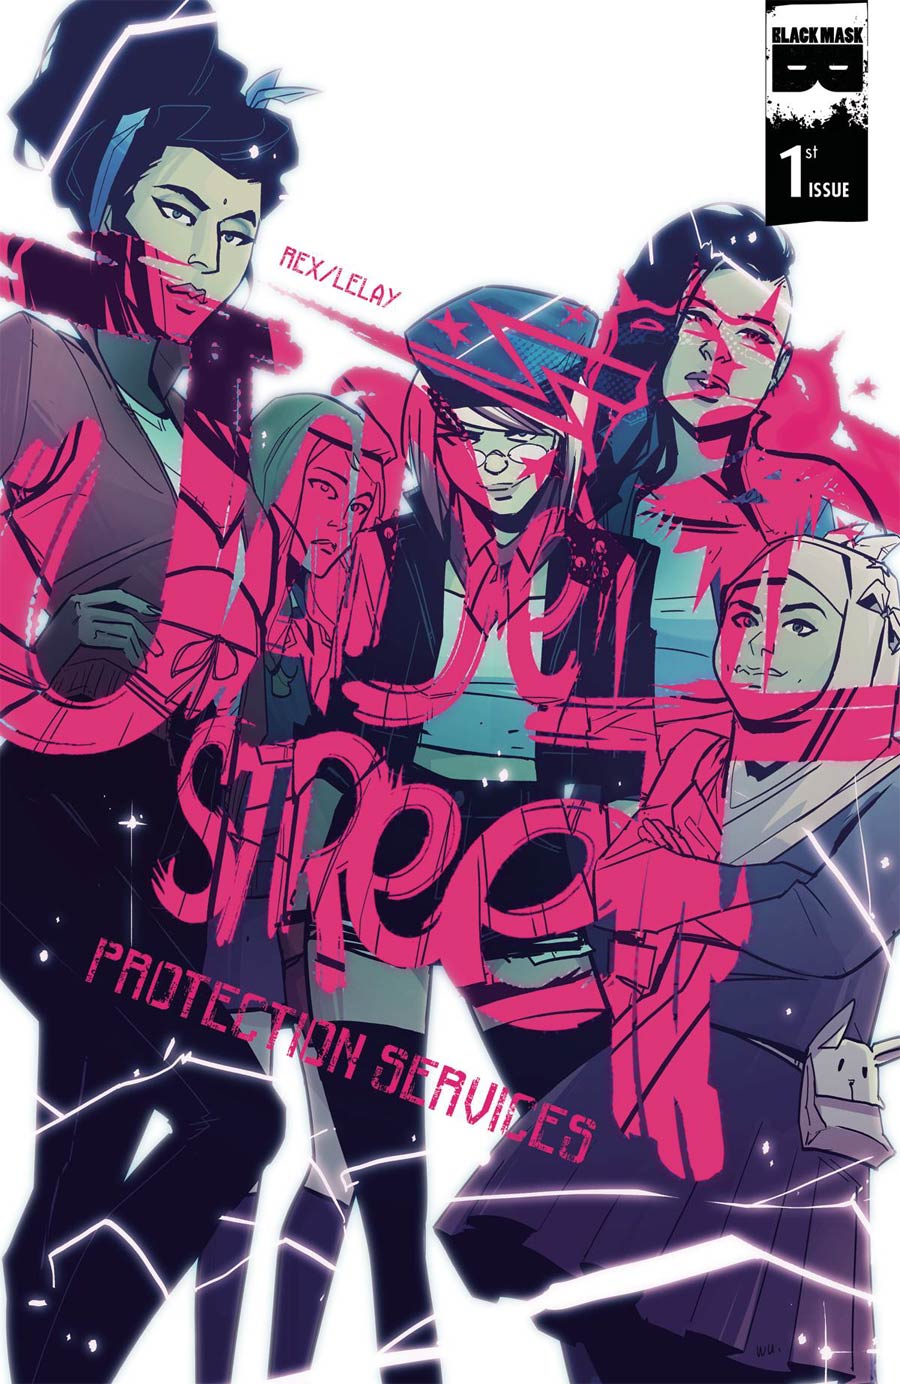 Jade Street Protection Services - cover by Annie Wu